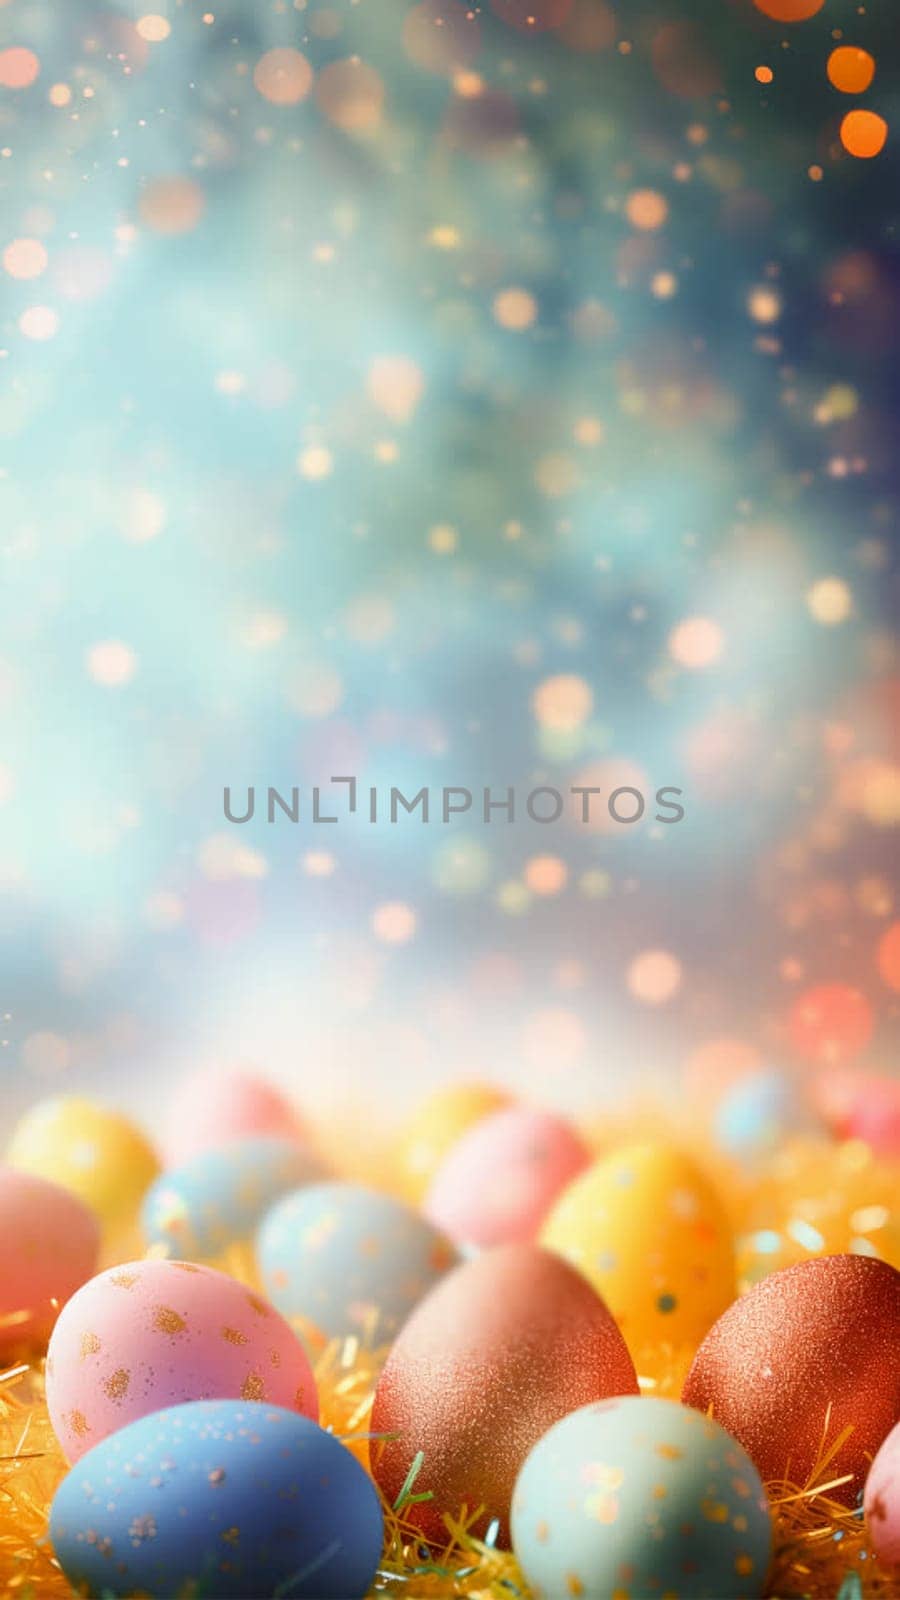 A blue background with pink and white flowers and eggs